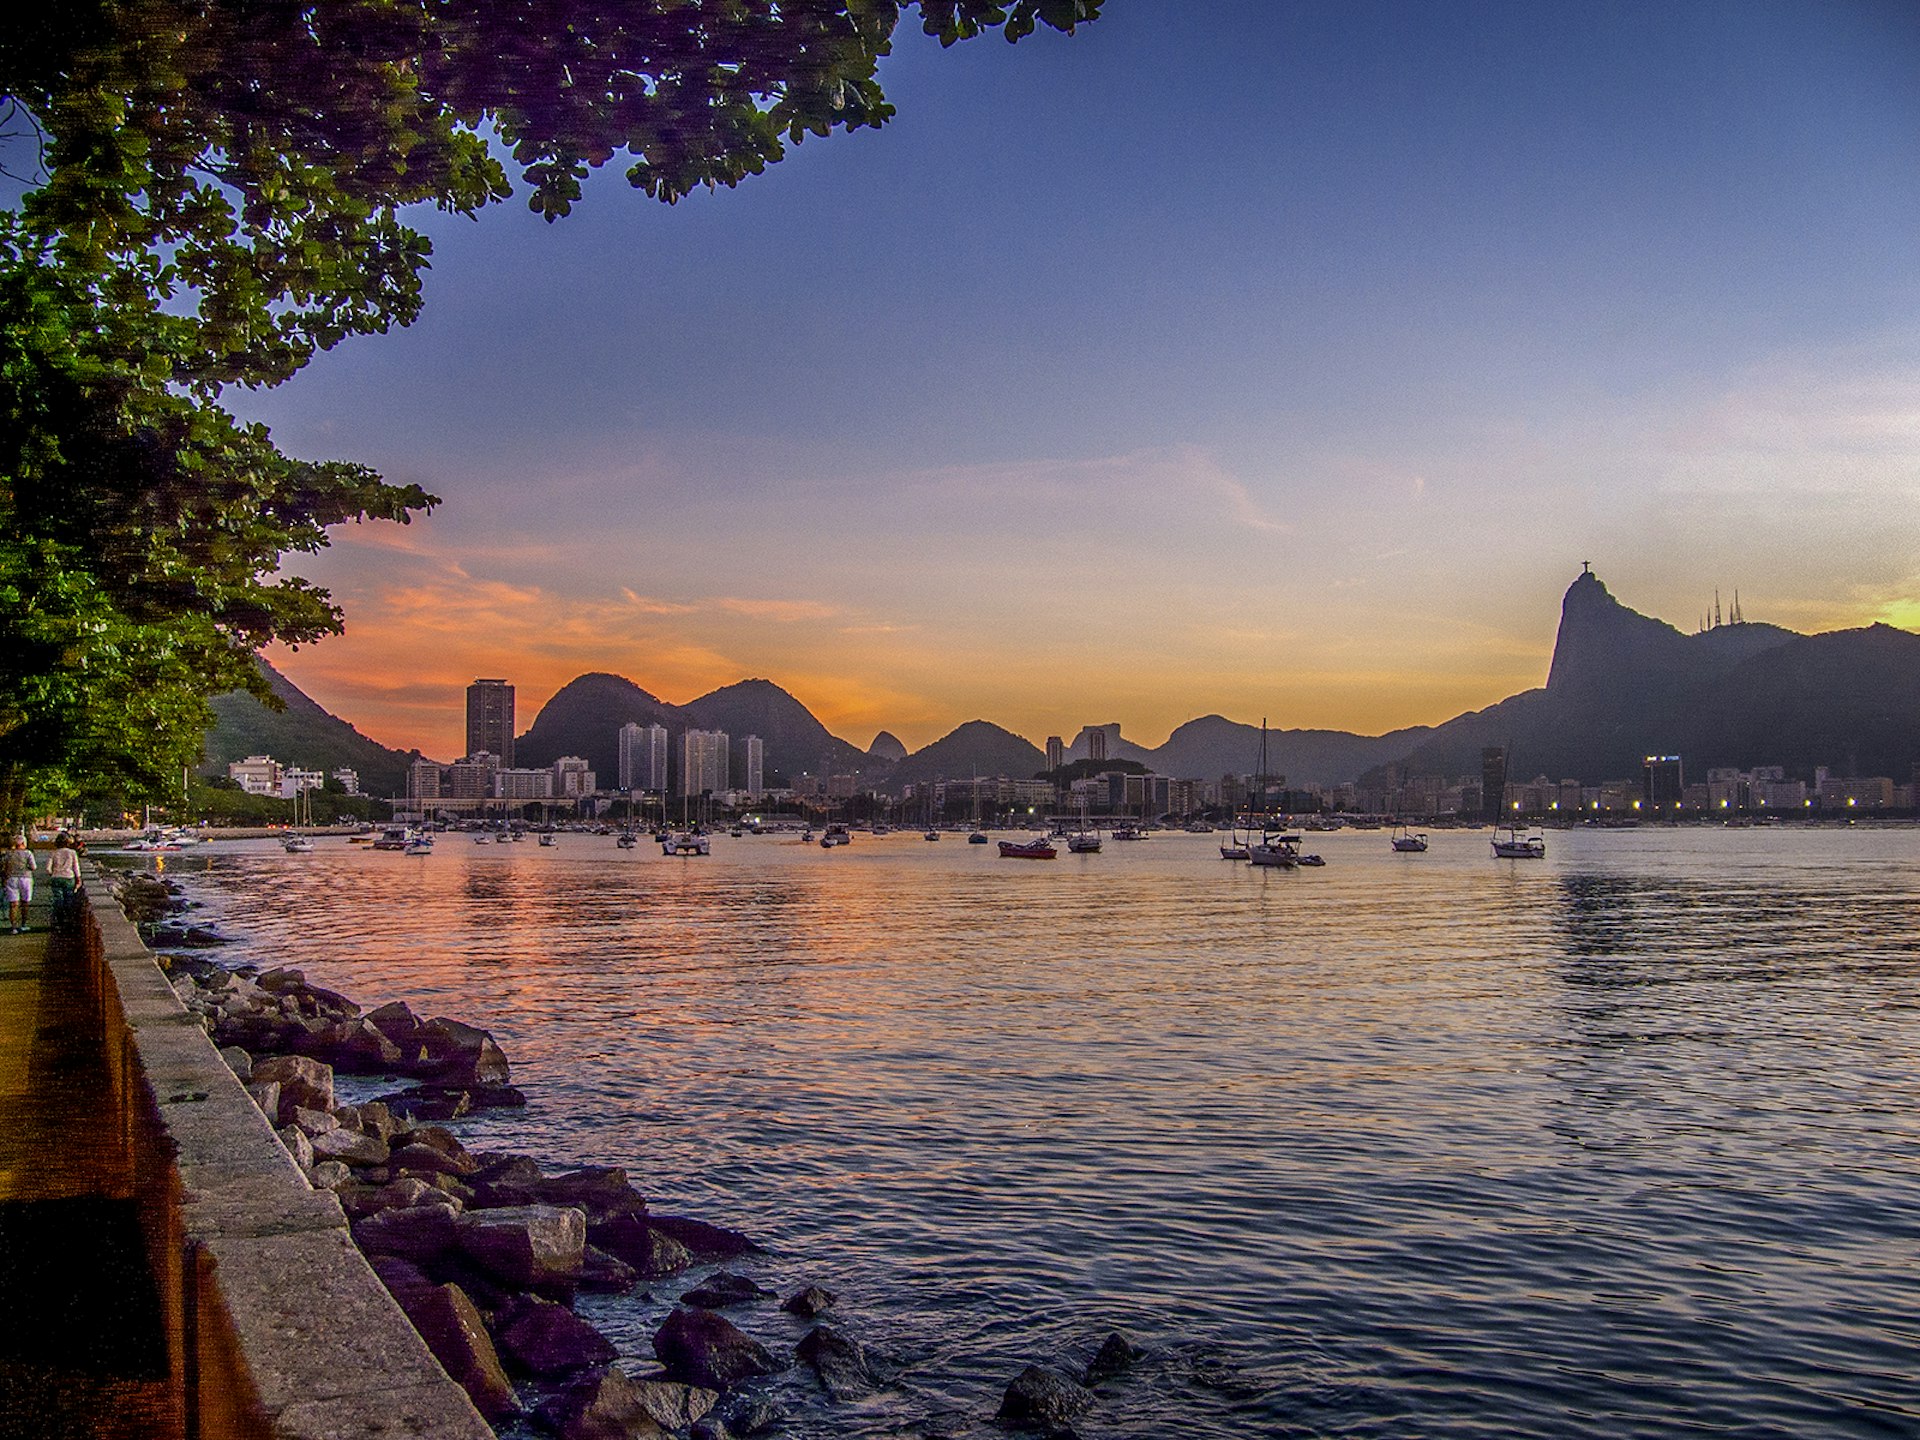 A view of Rio at sunset from a sea wall lining a walking path to the left side of the image, with boats in Guanabara Bay